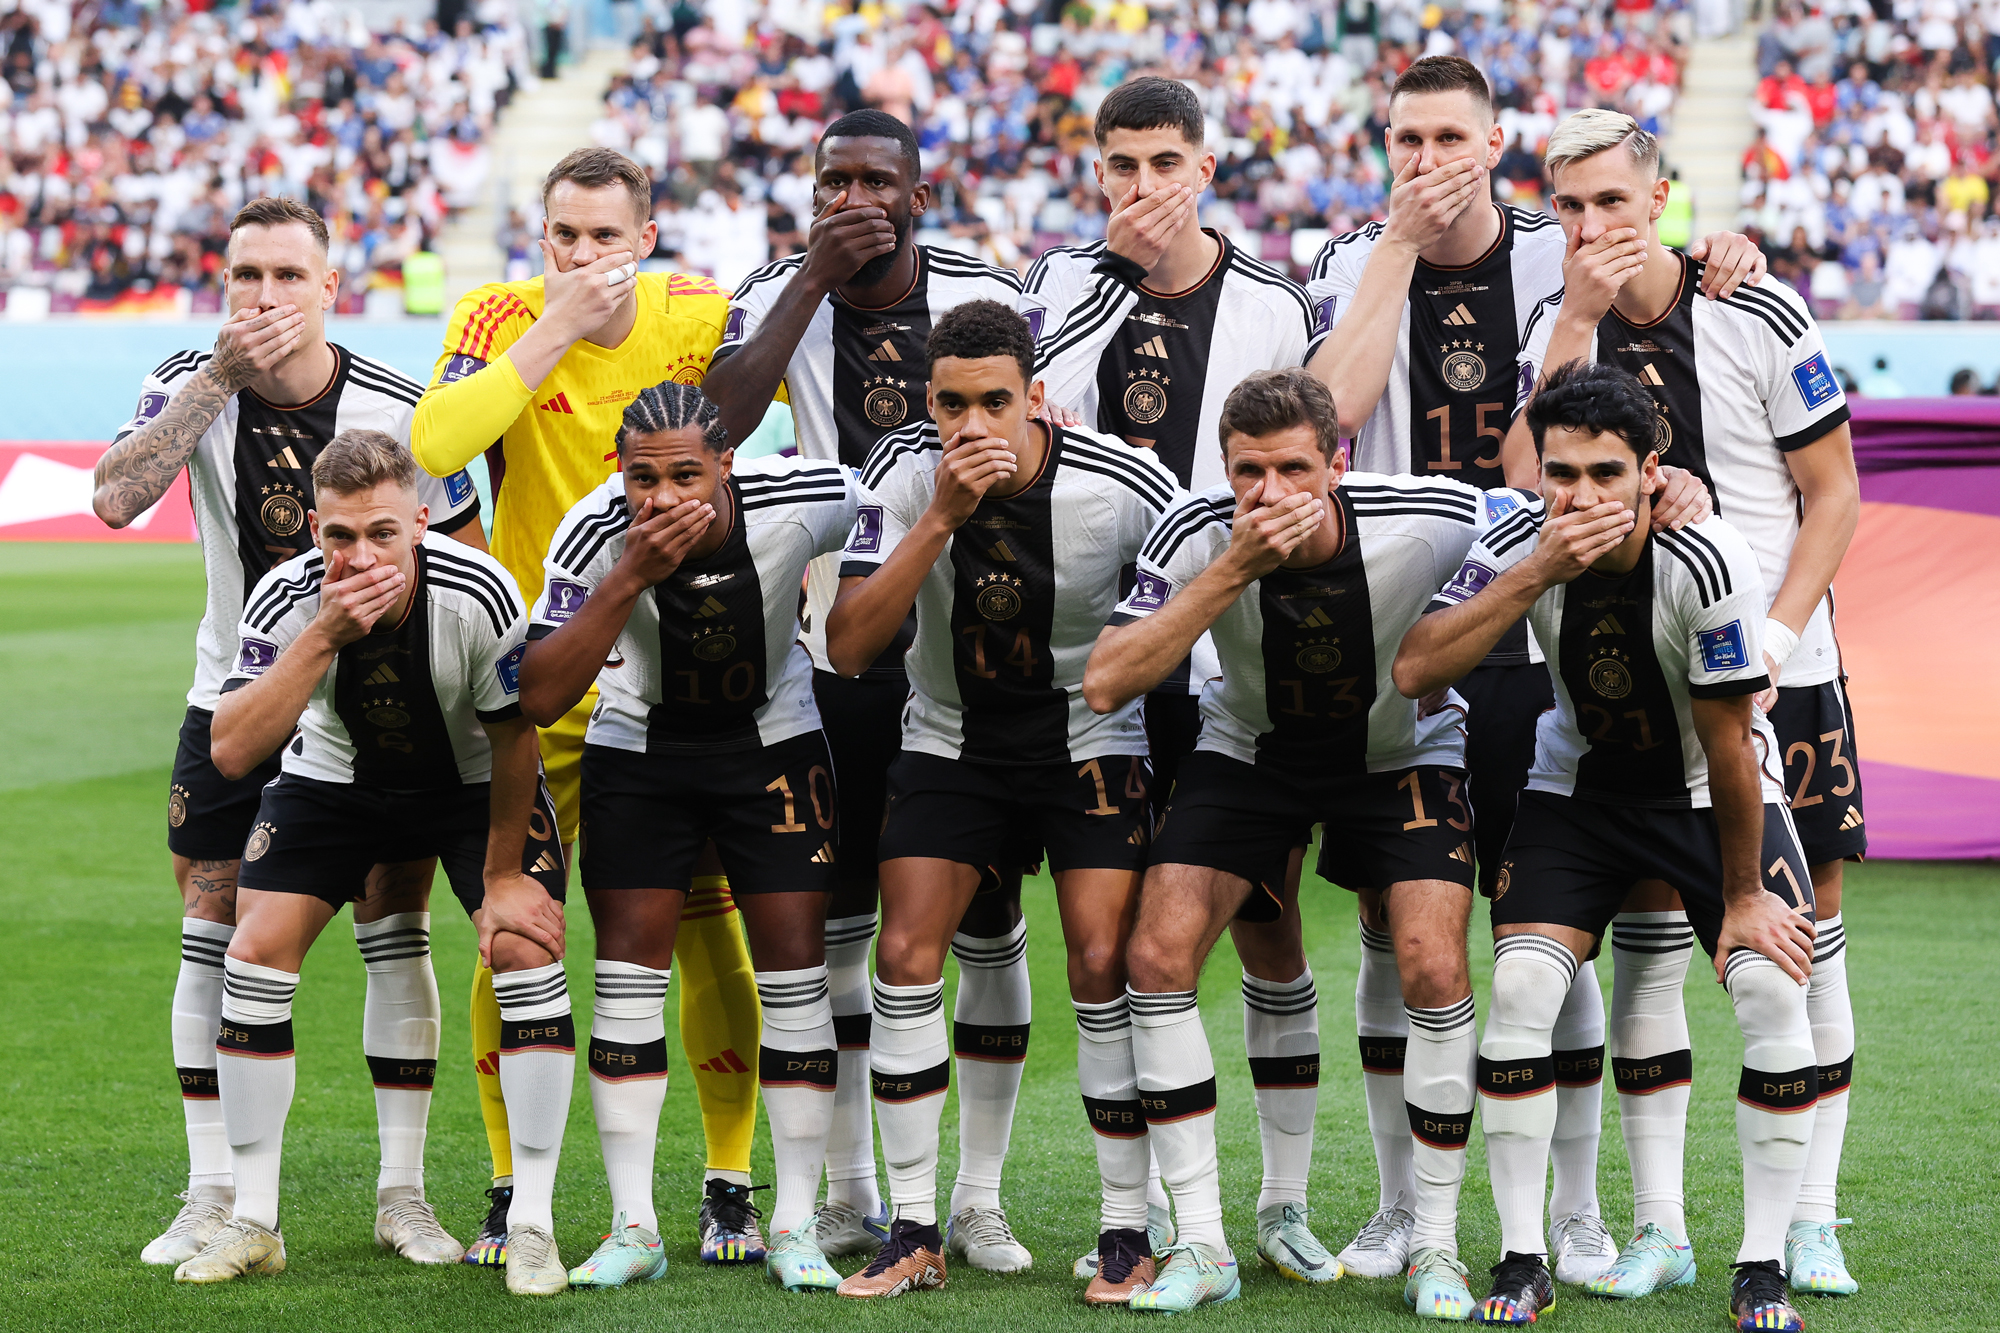 Germany's players cover their mouths as they pose for a team photo before their match against Japan at Khalifa International Stadium in Doha, Qatar on Wednesday.